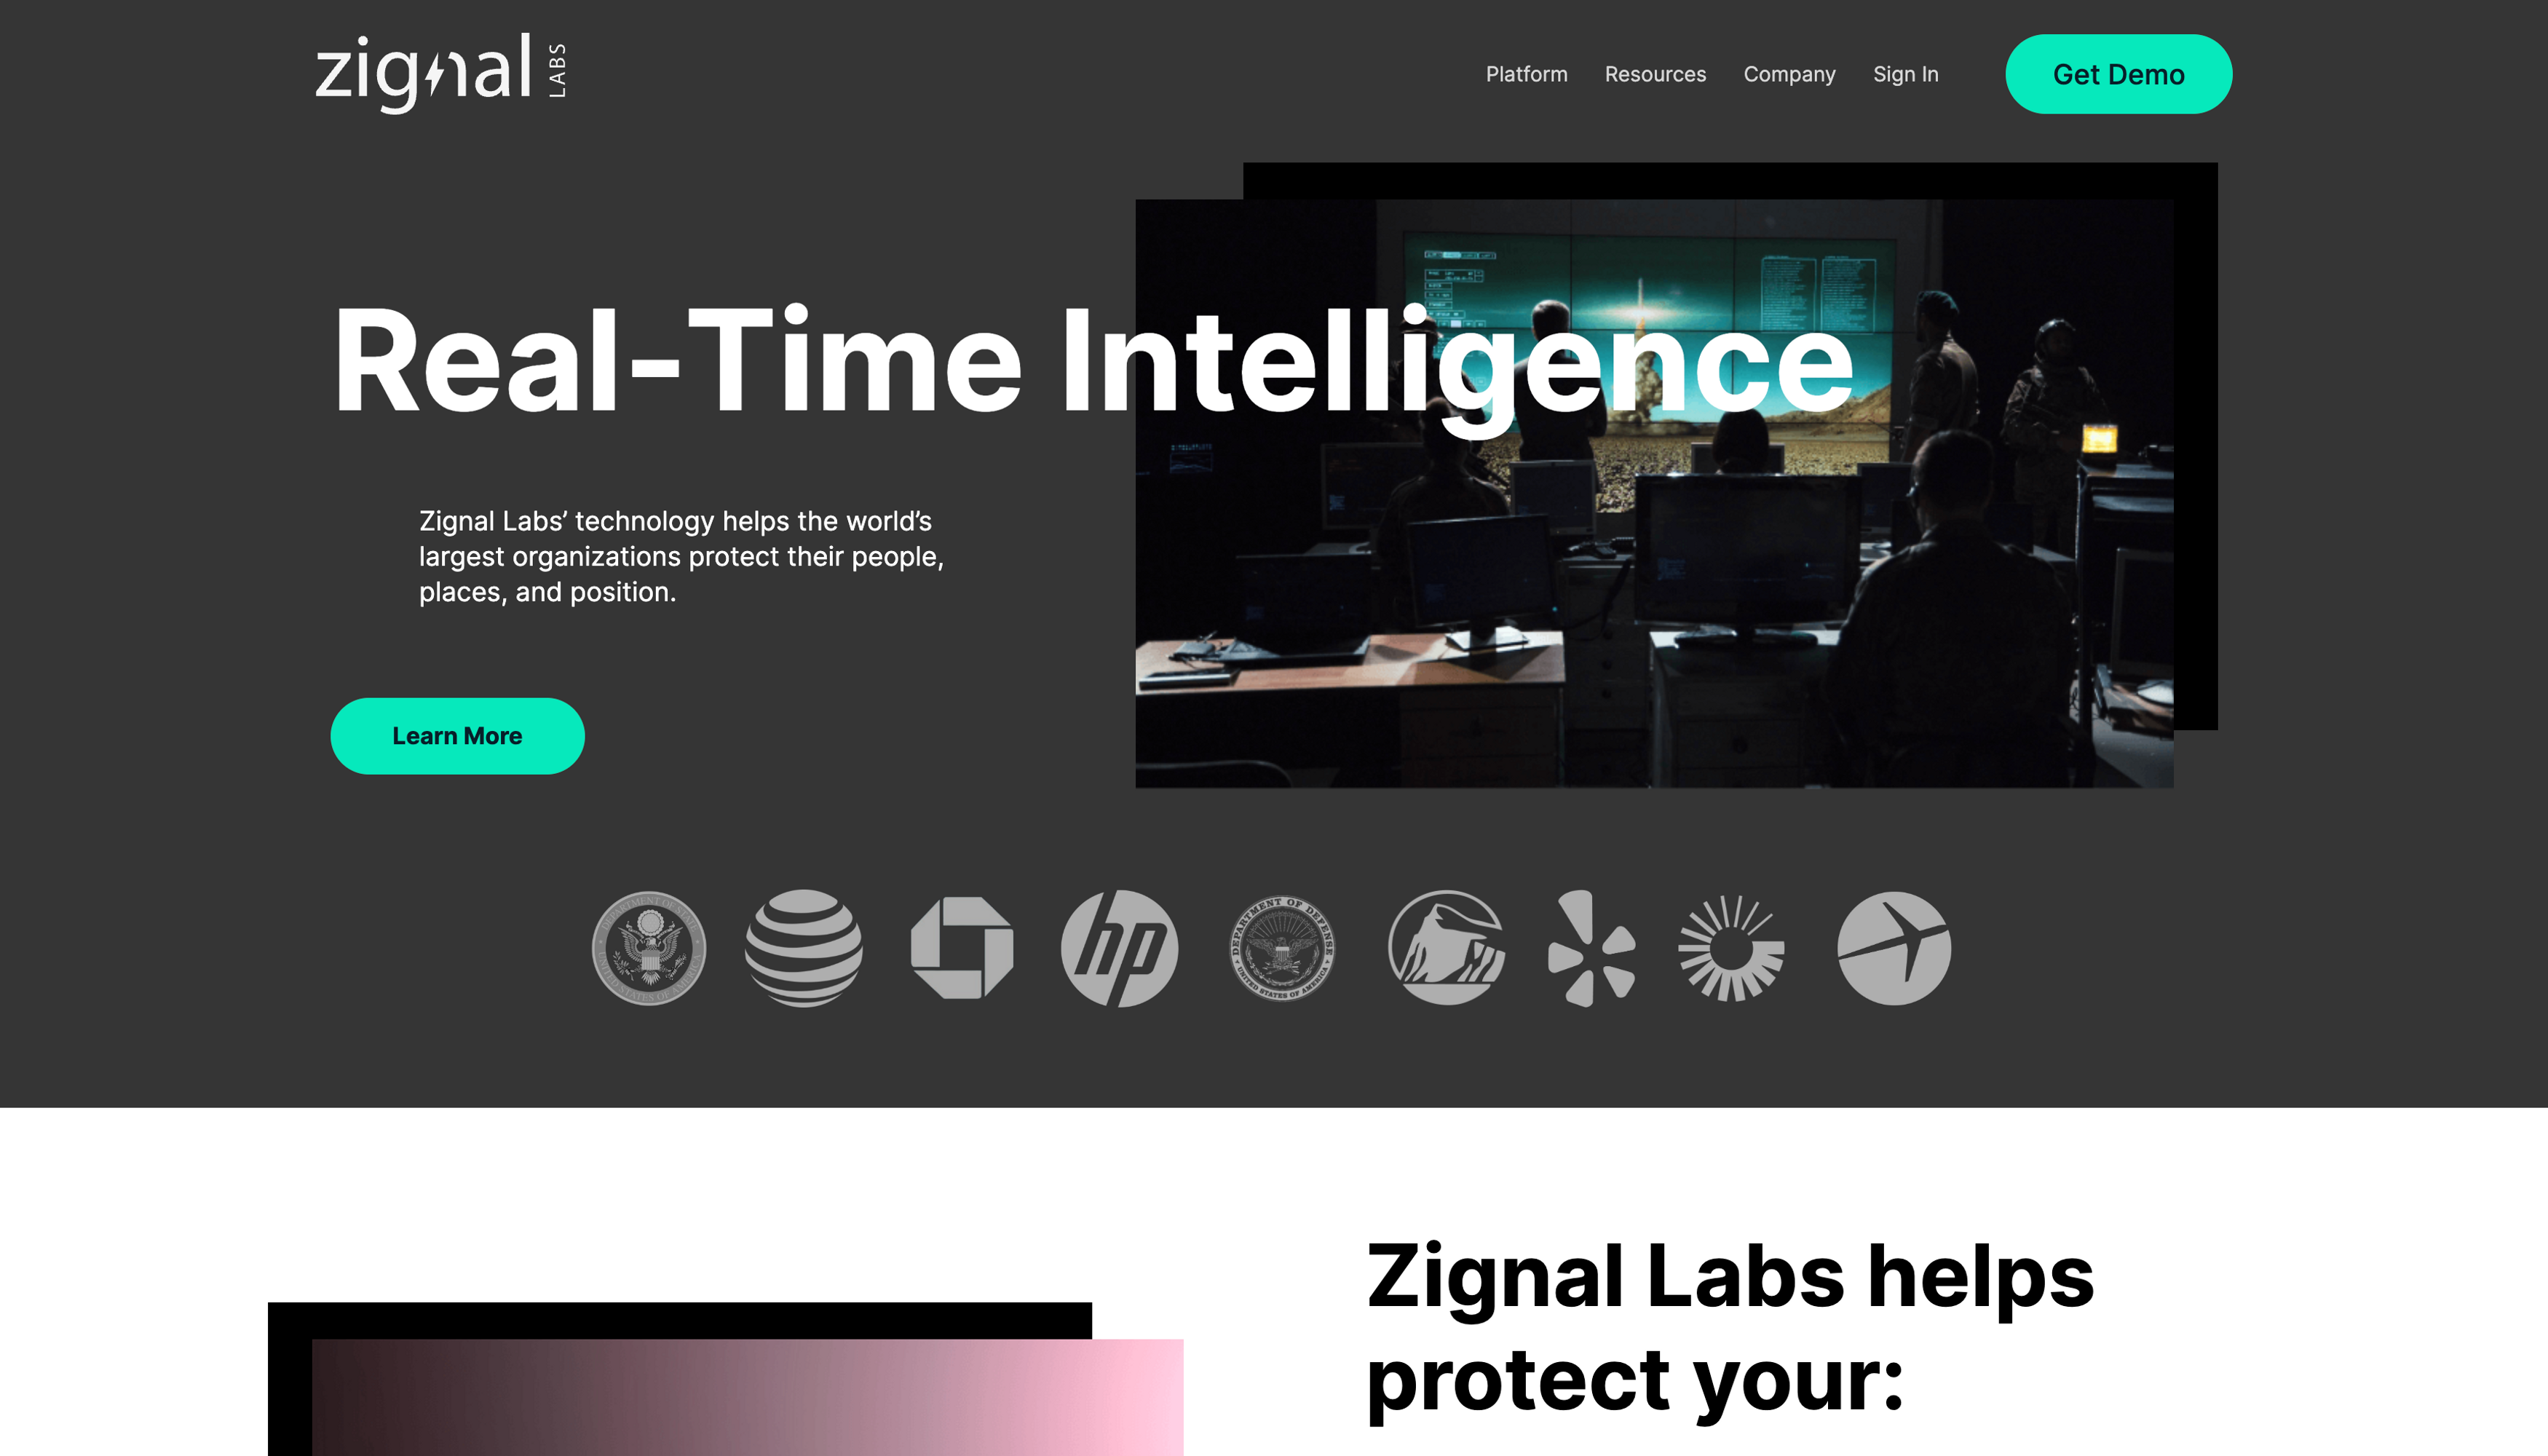 Cover image from Zignal Labs